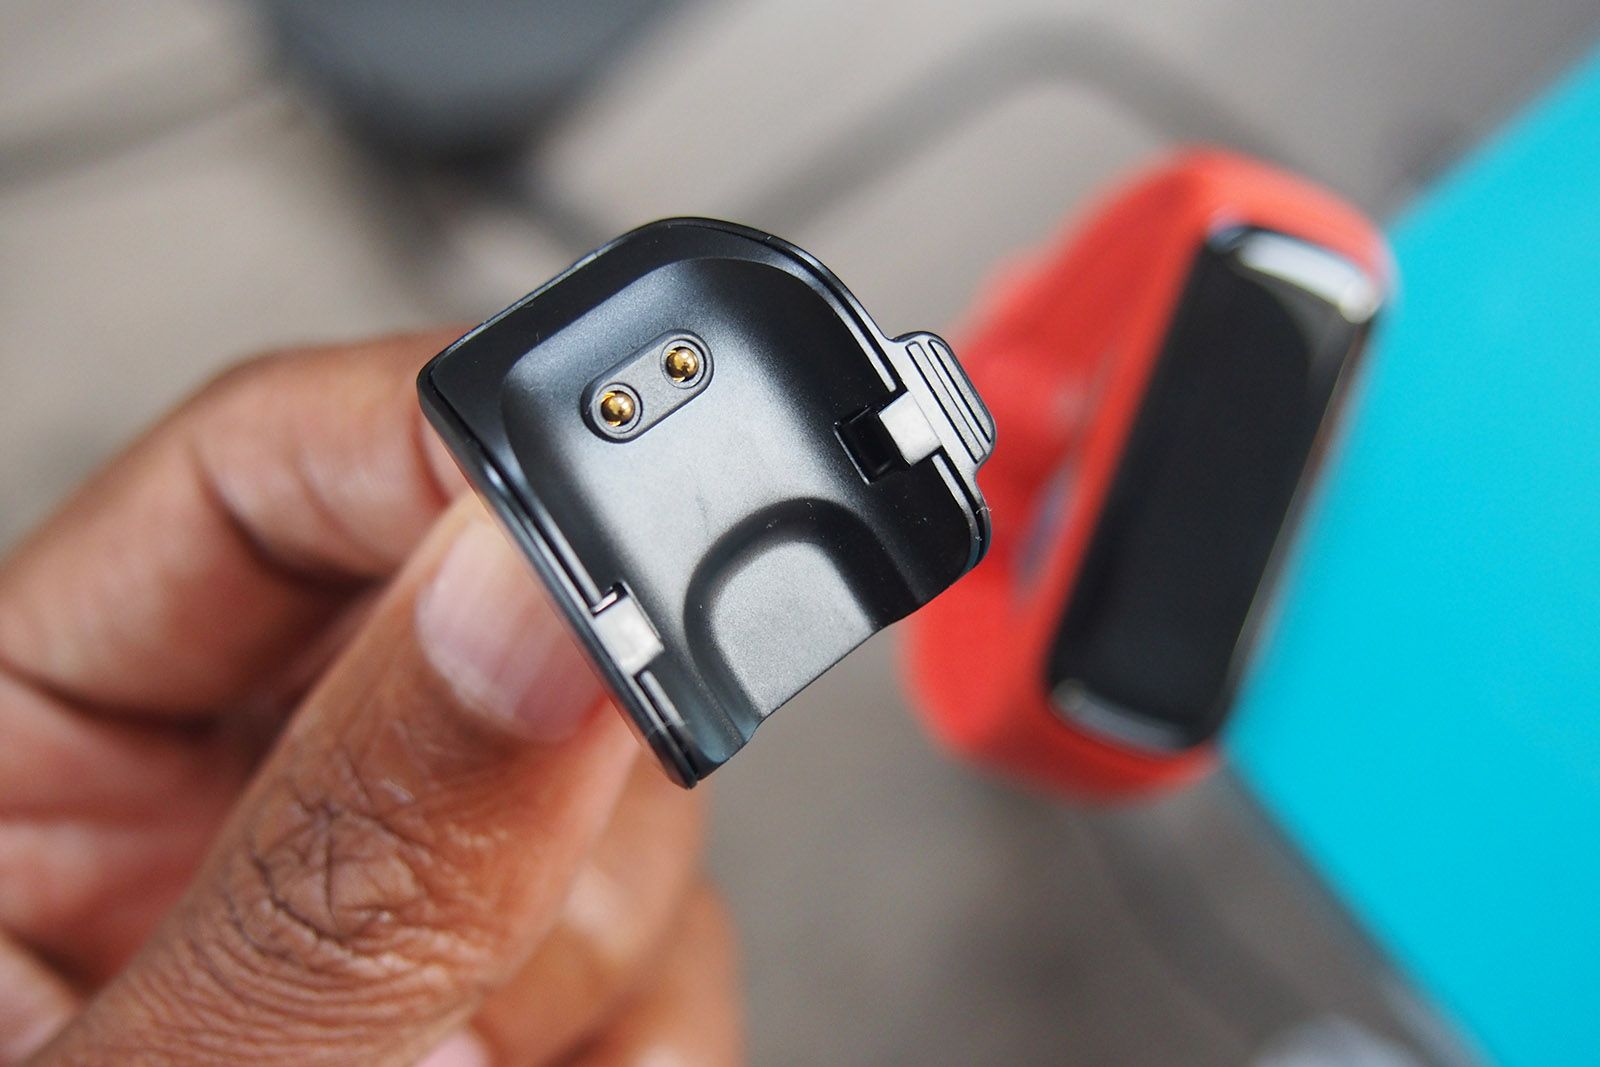 Samsung Galaxy Fit 2 review: Fit for the basics